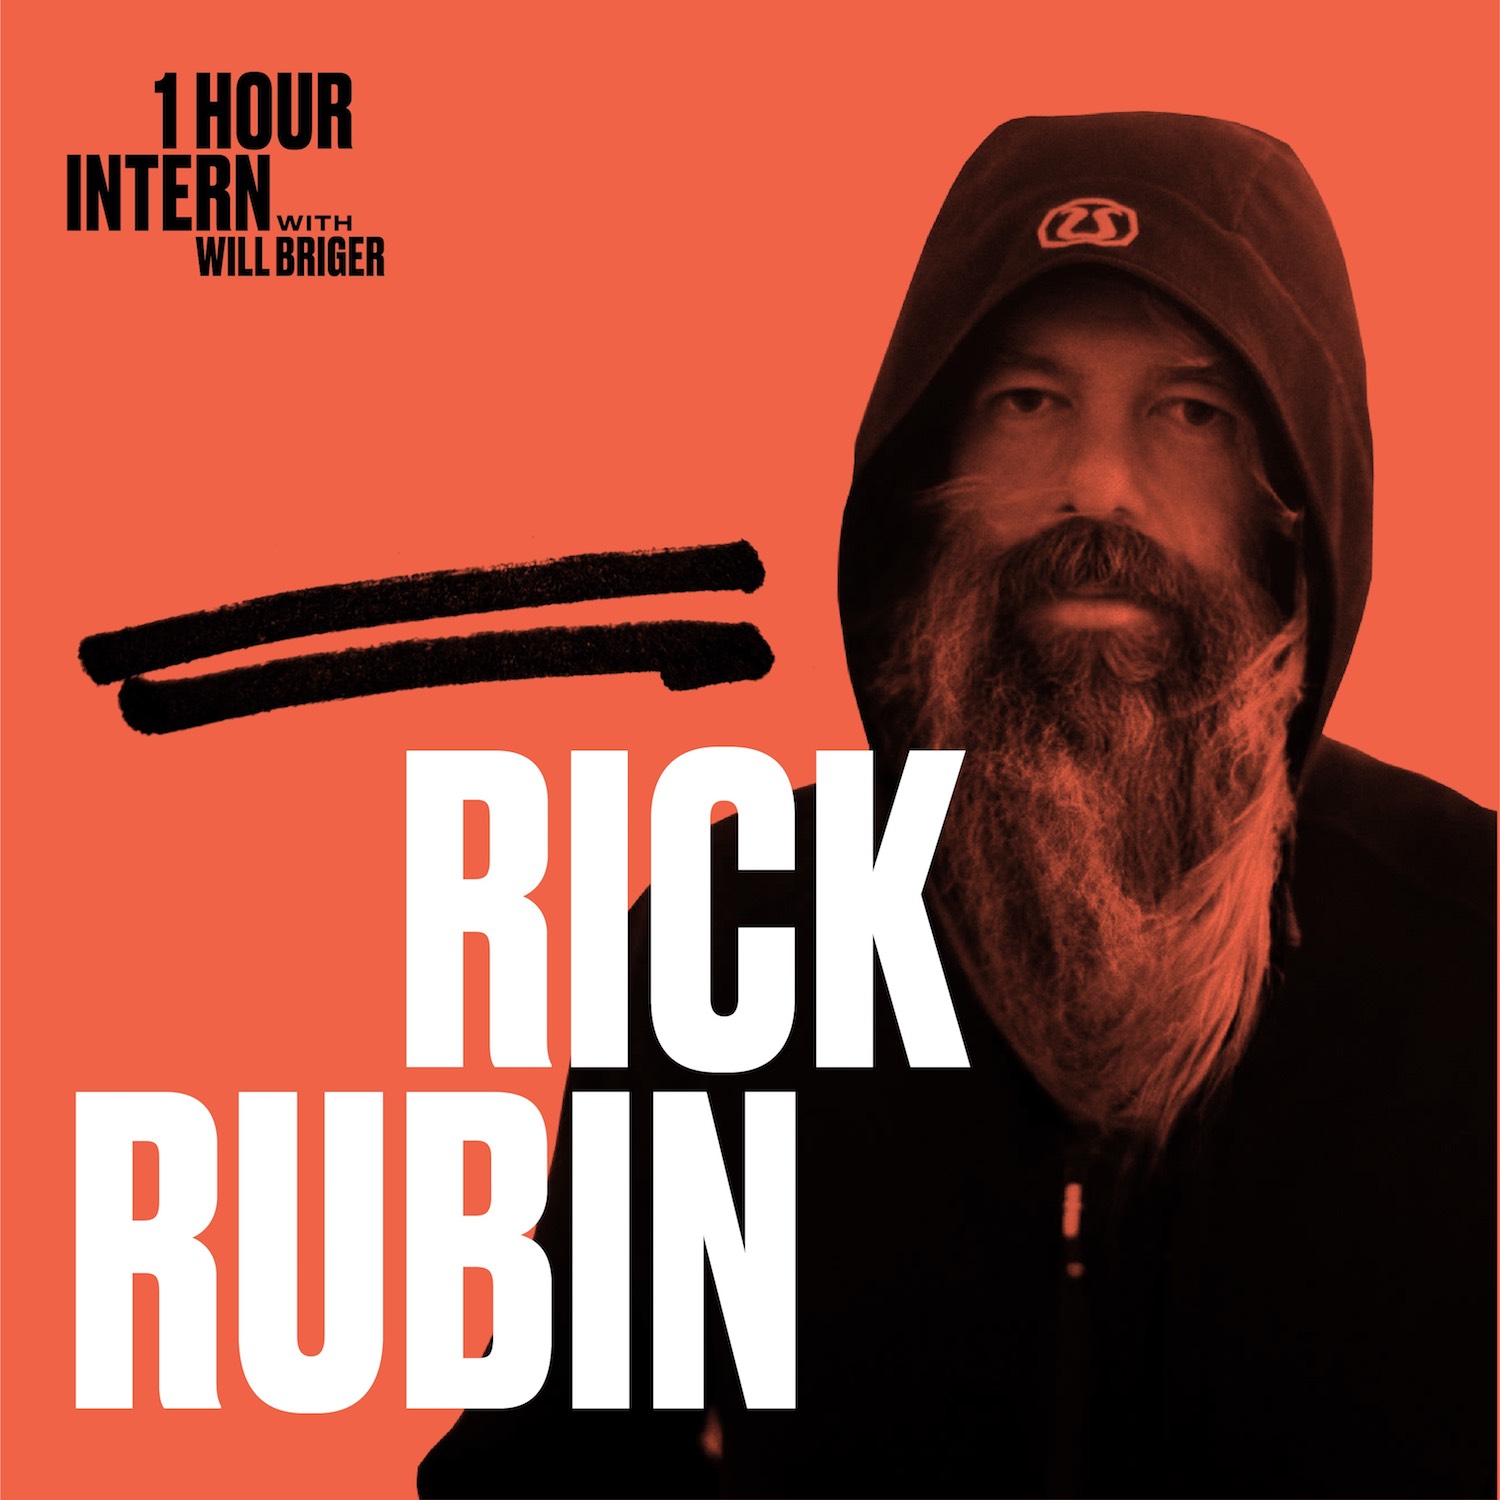 Music with super producer, Rick Rubin